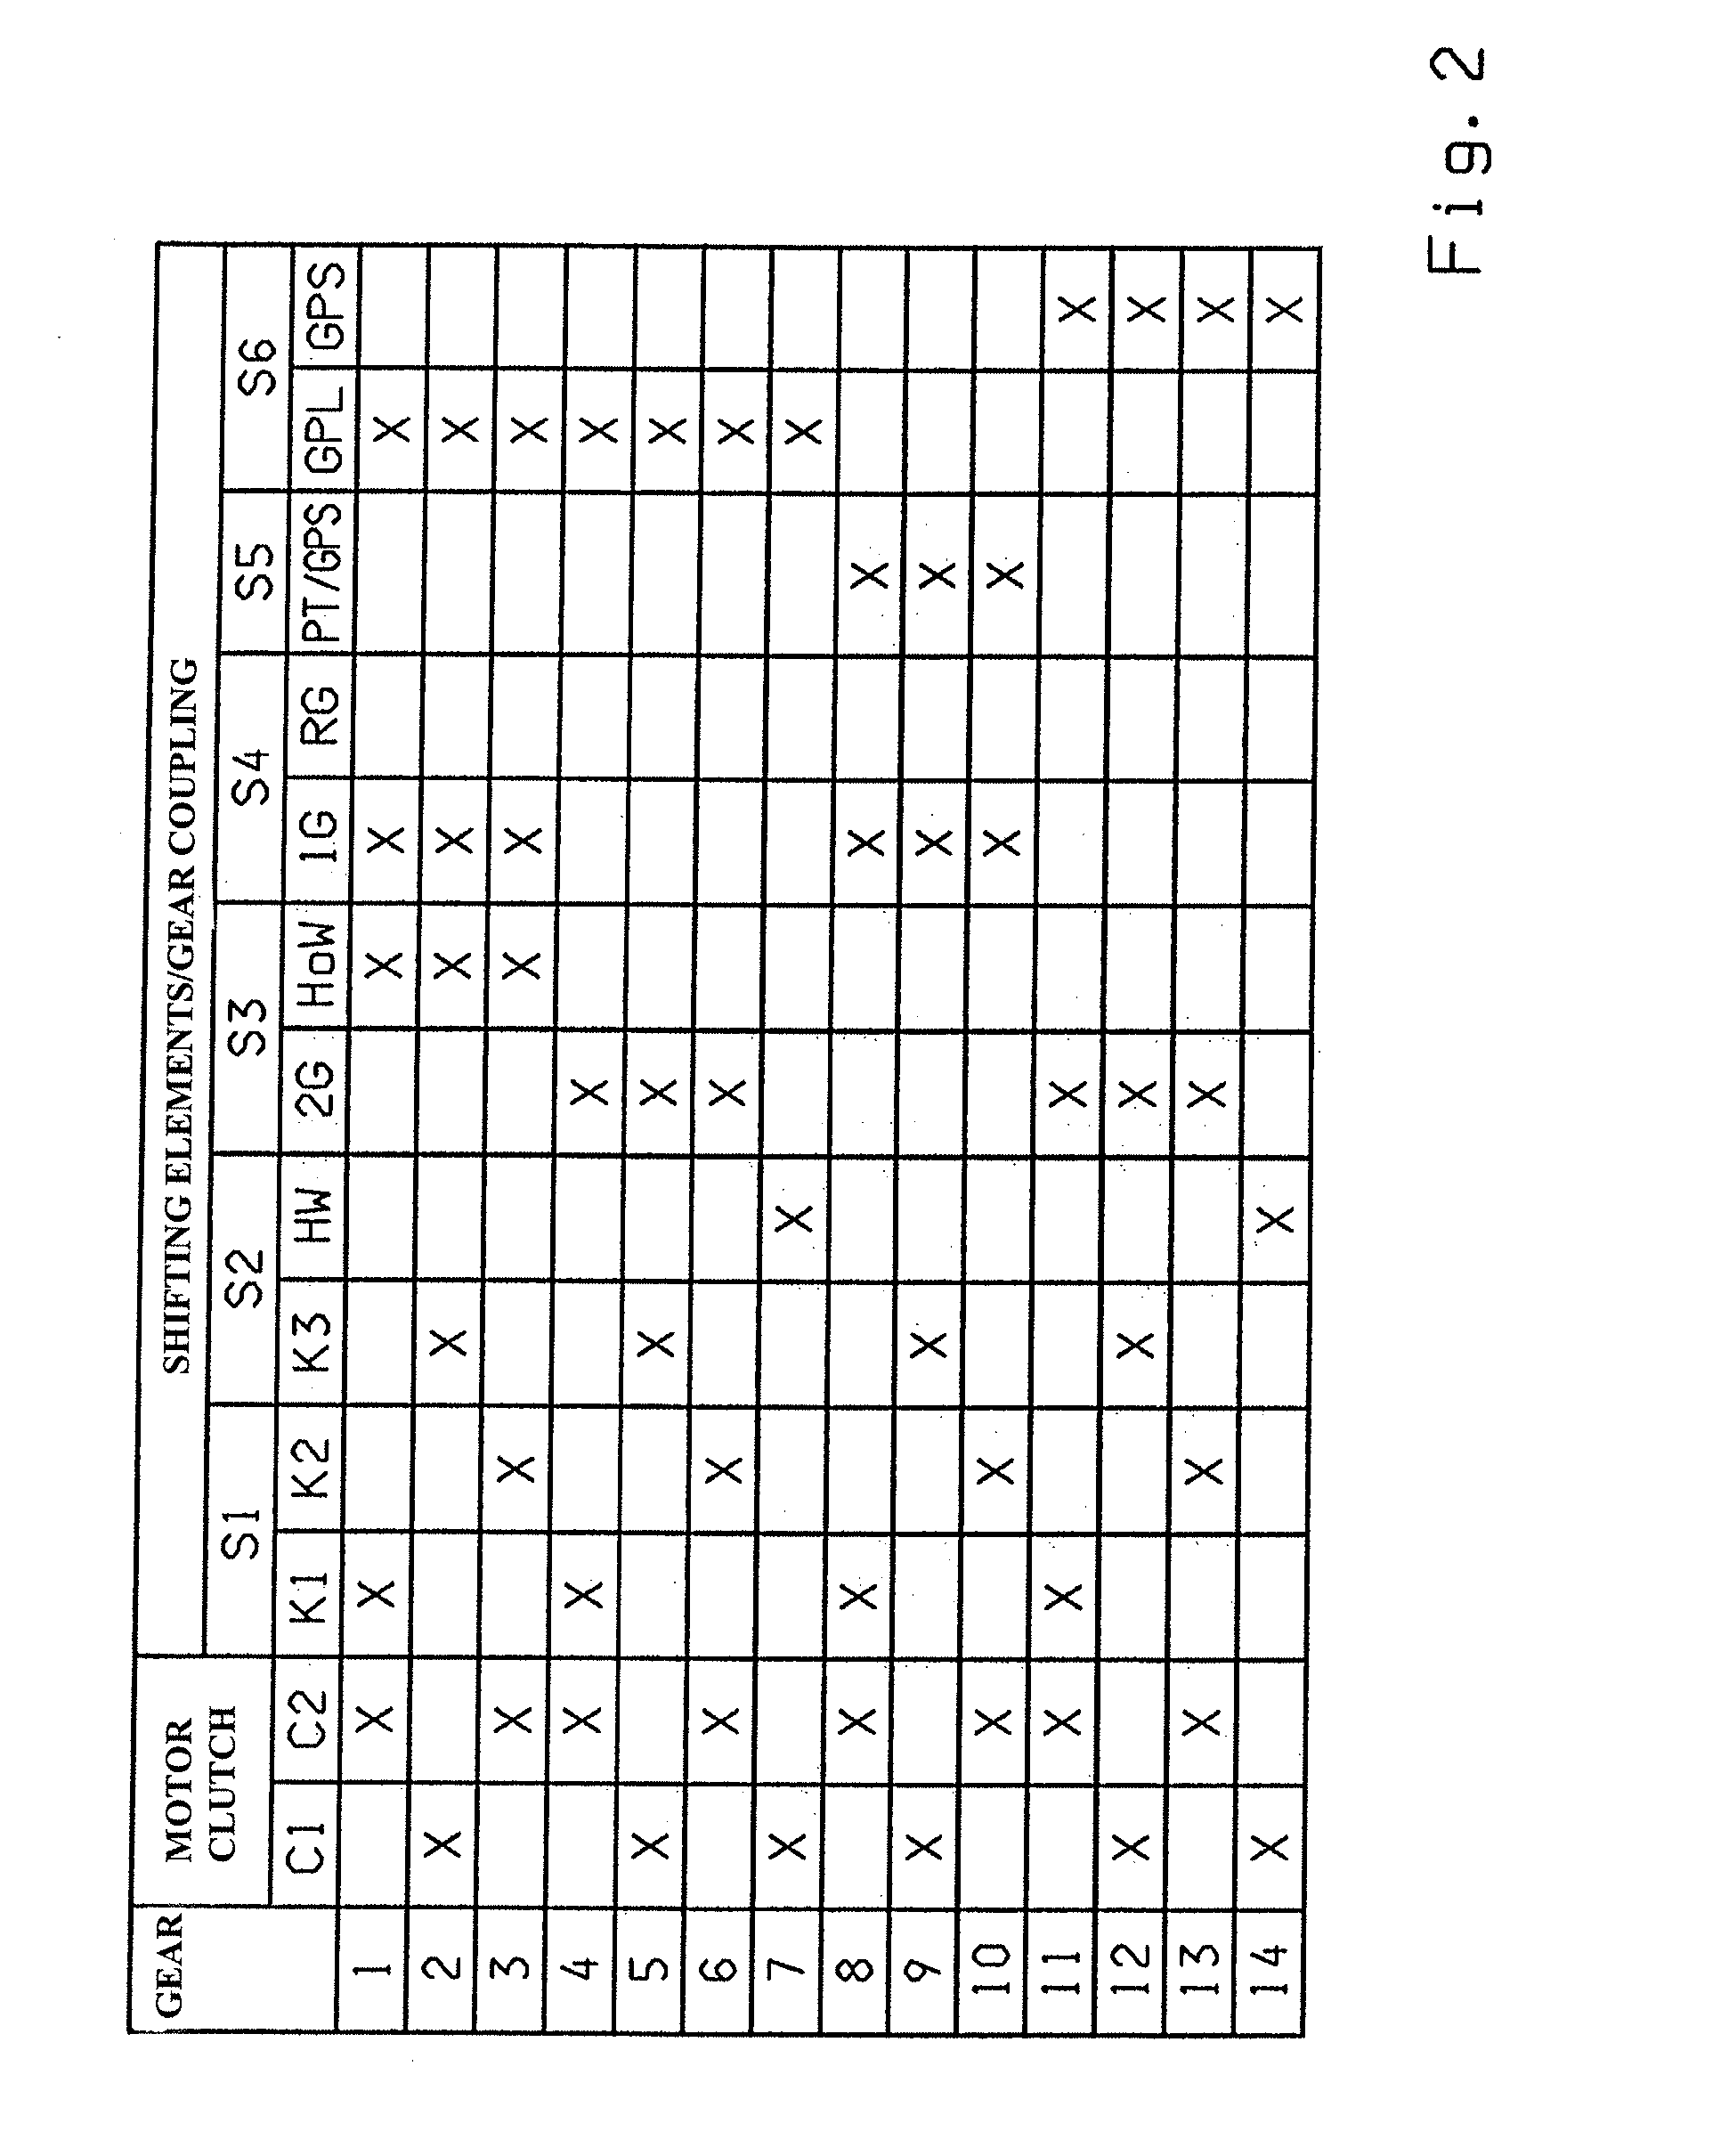 Dual-clutch group transmission and method for actuating a dual-clutch group transmission